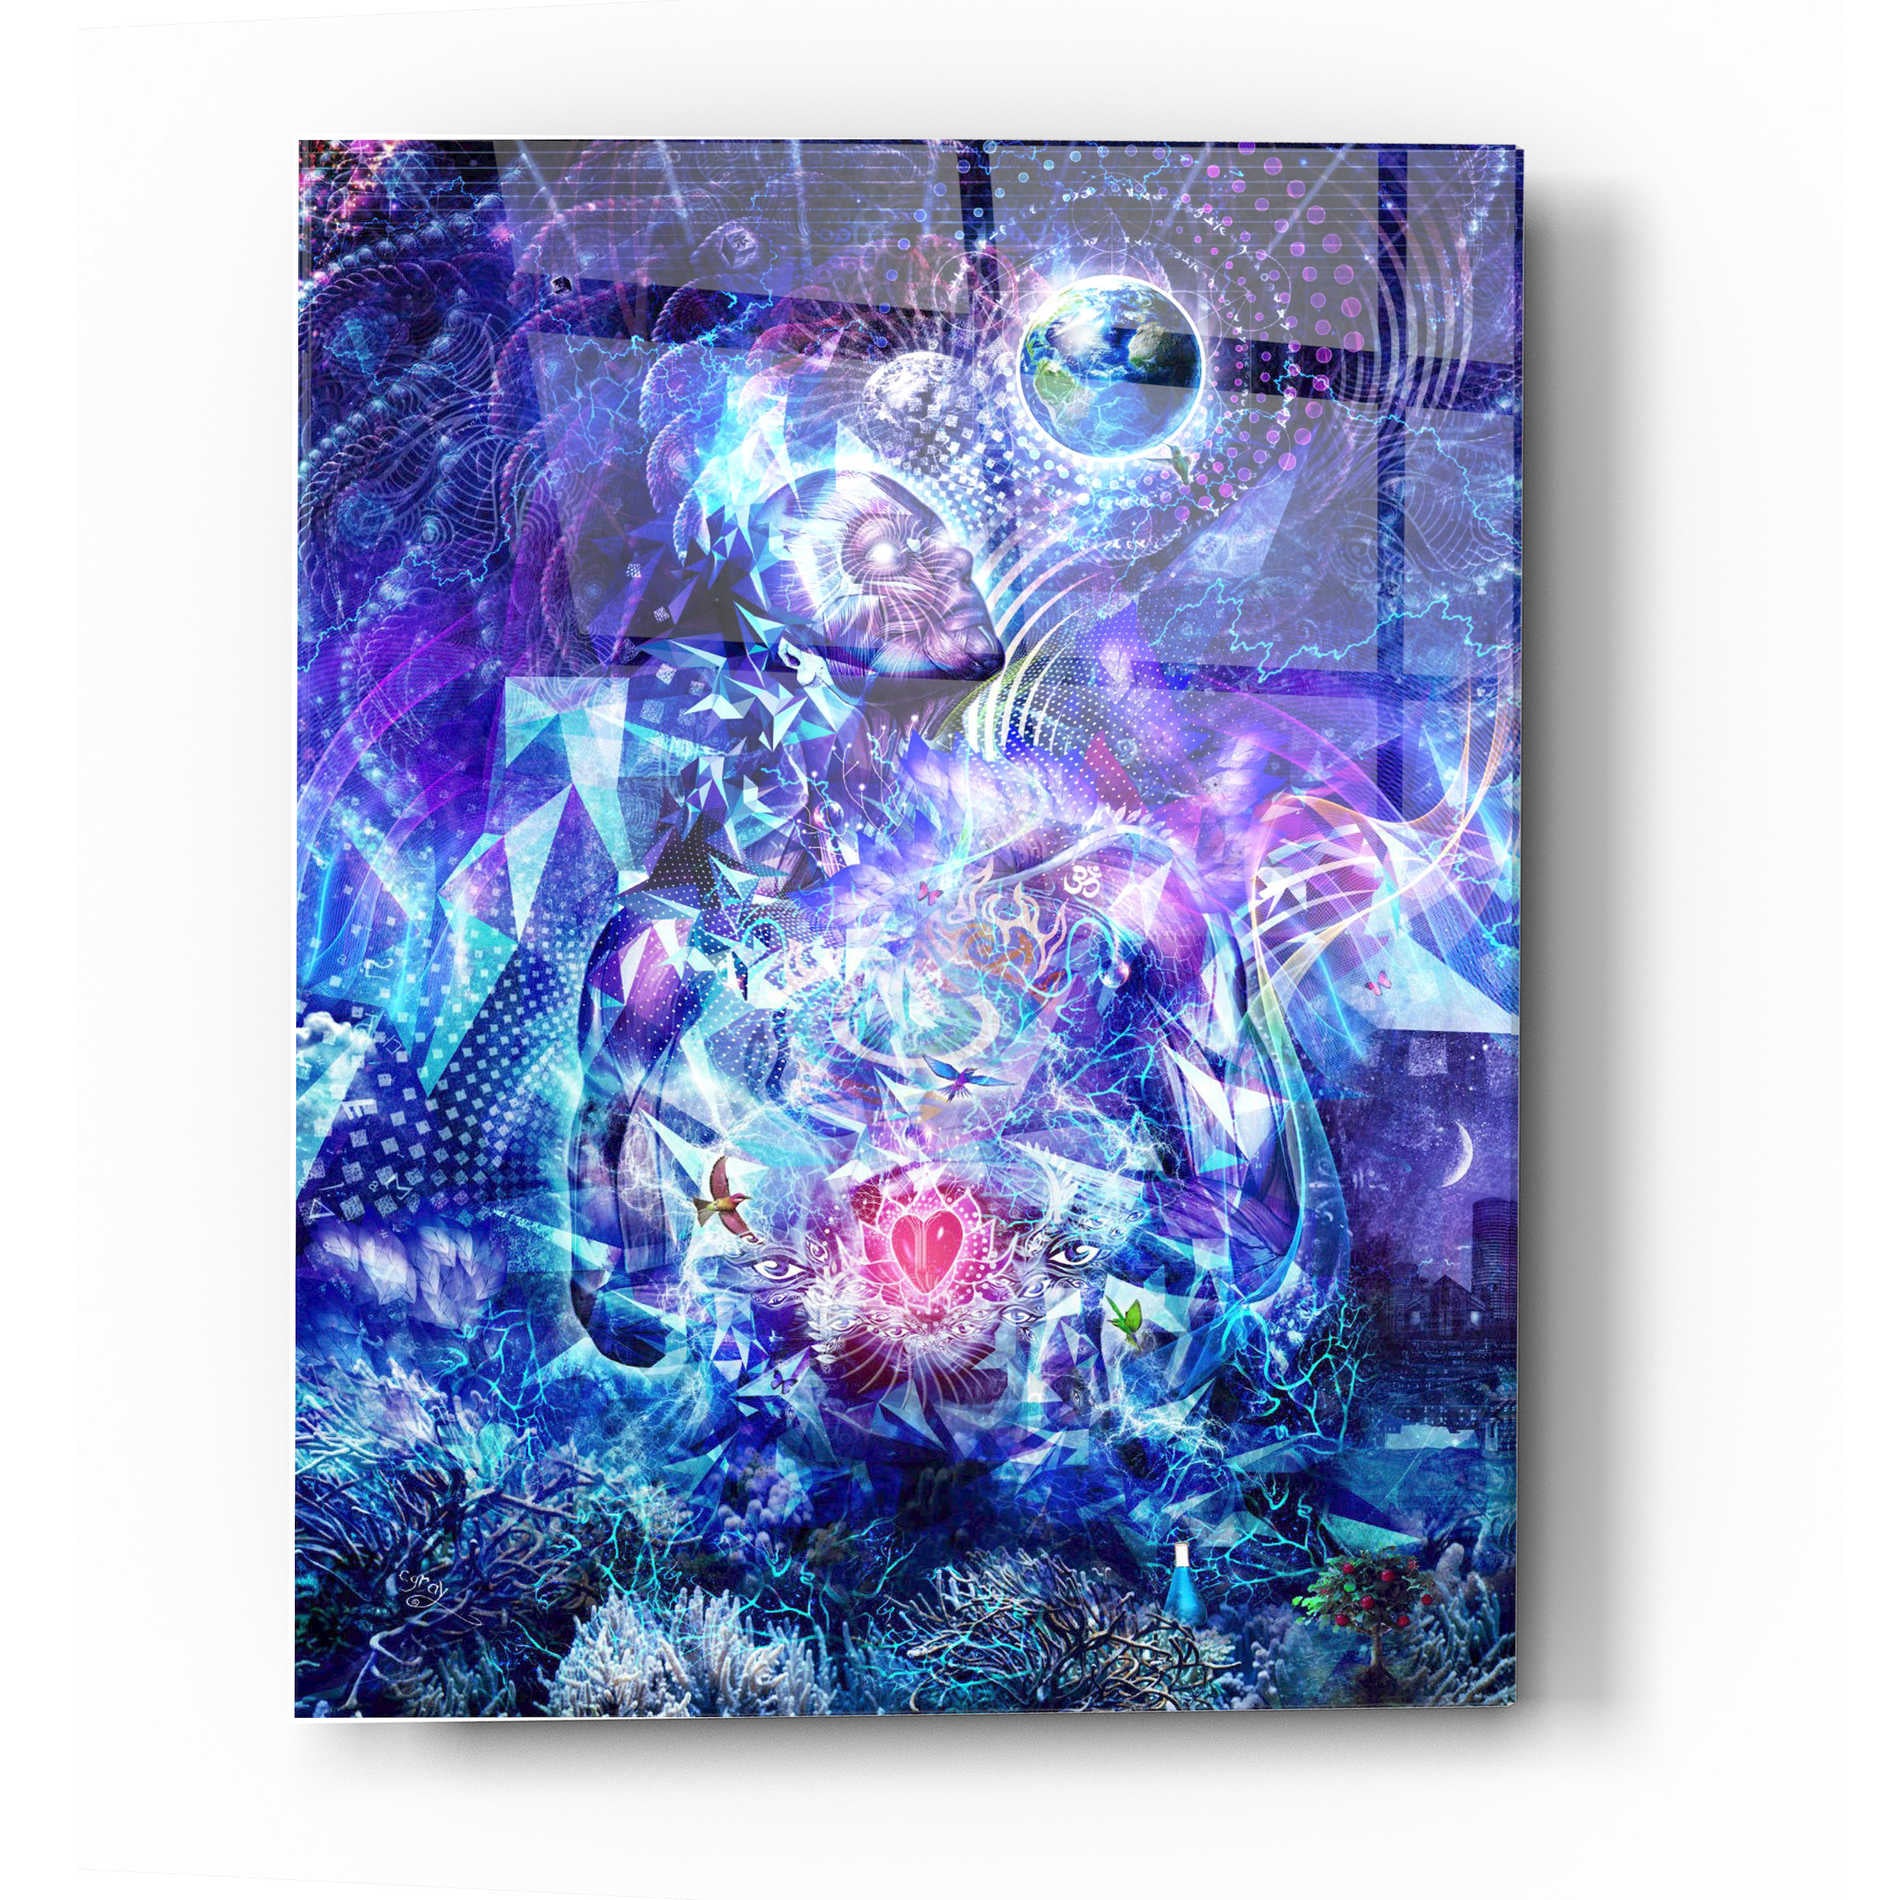 Epic Art 'Transcension Vertical' by Cameron Gray, Acrylic Glass Wall Art